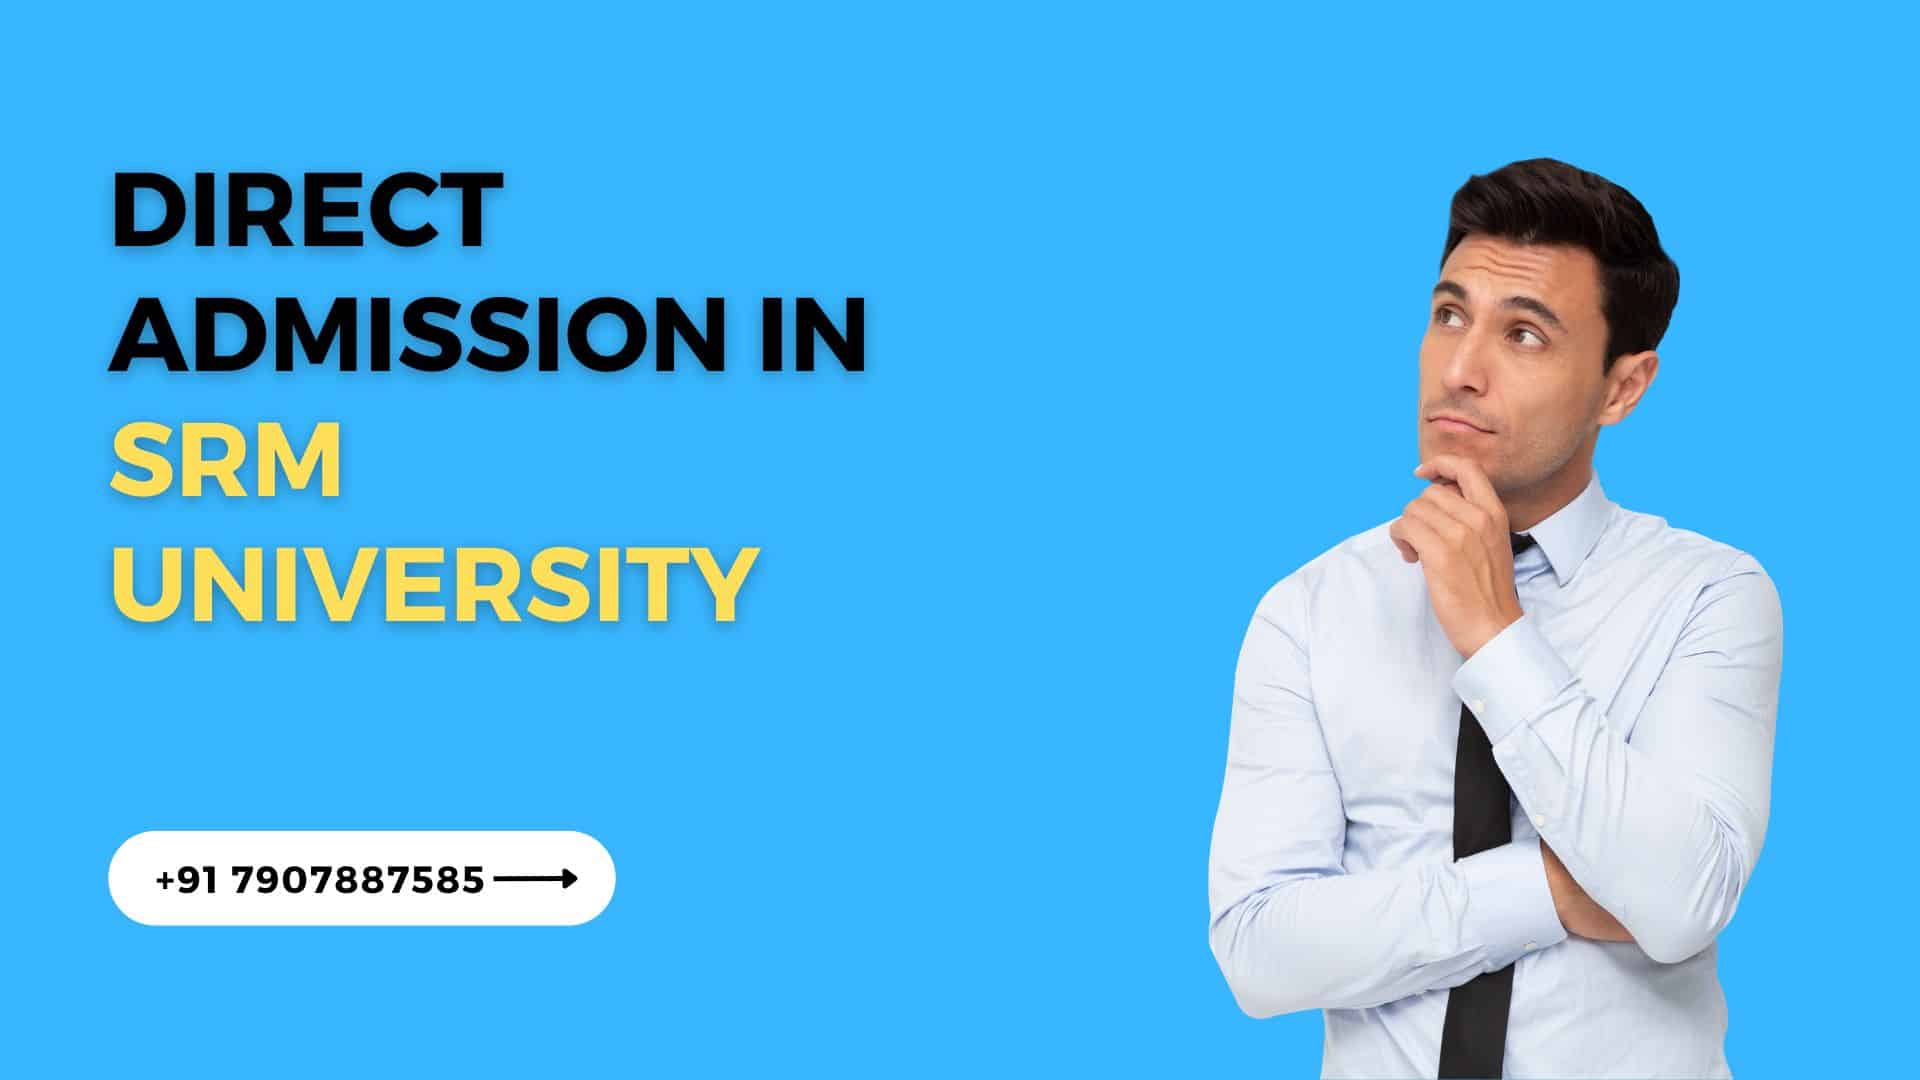 Direct-admission-in-srm-University